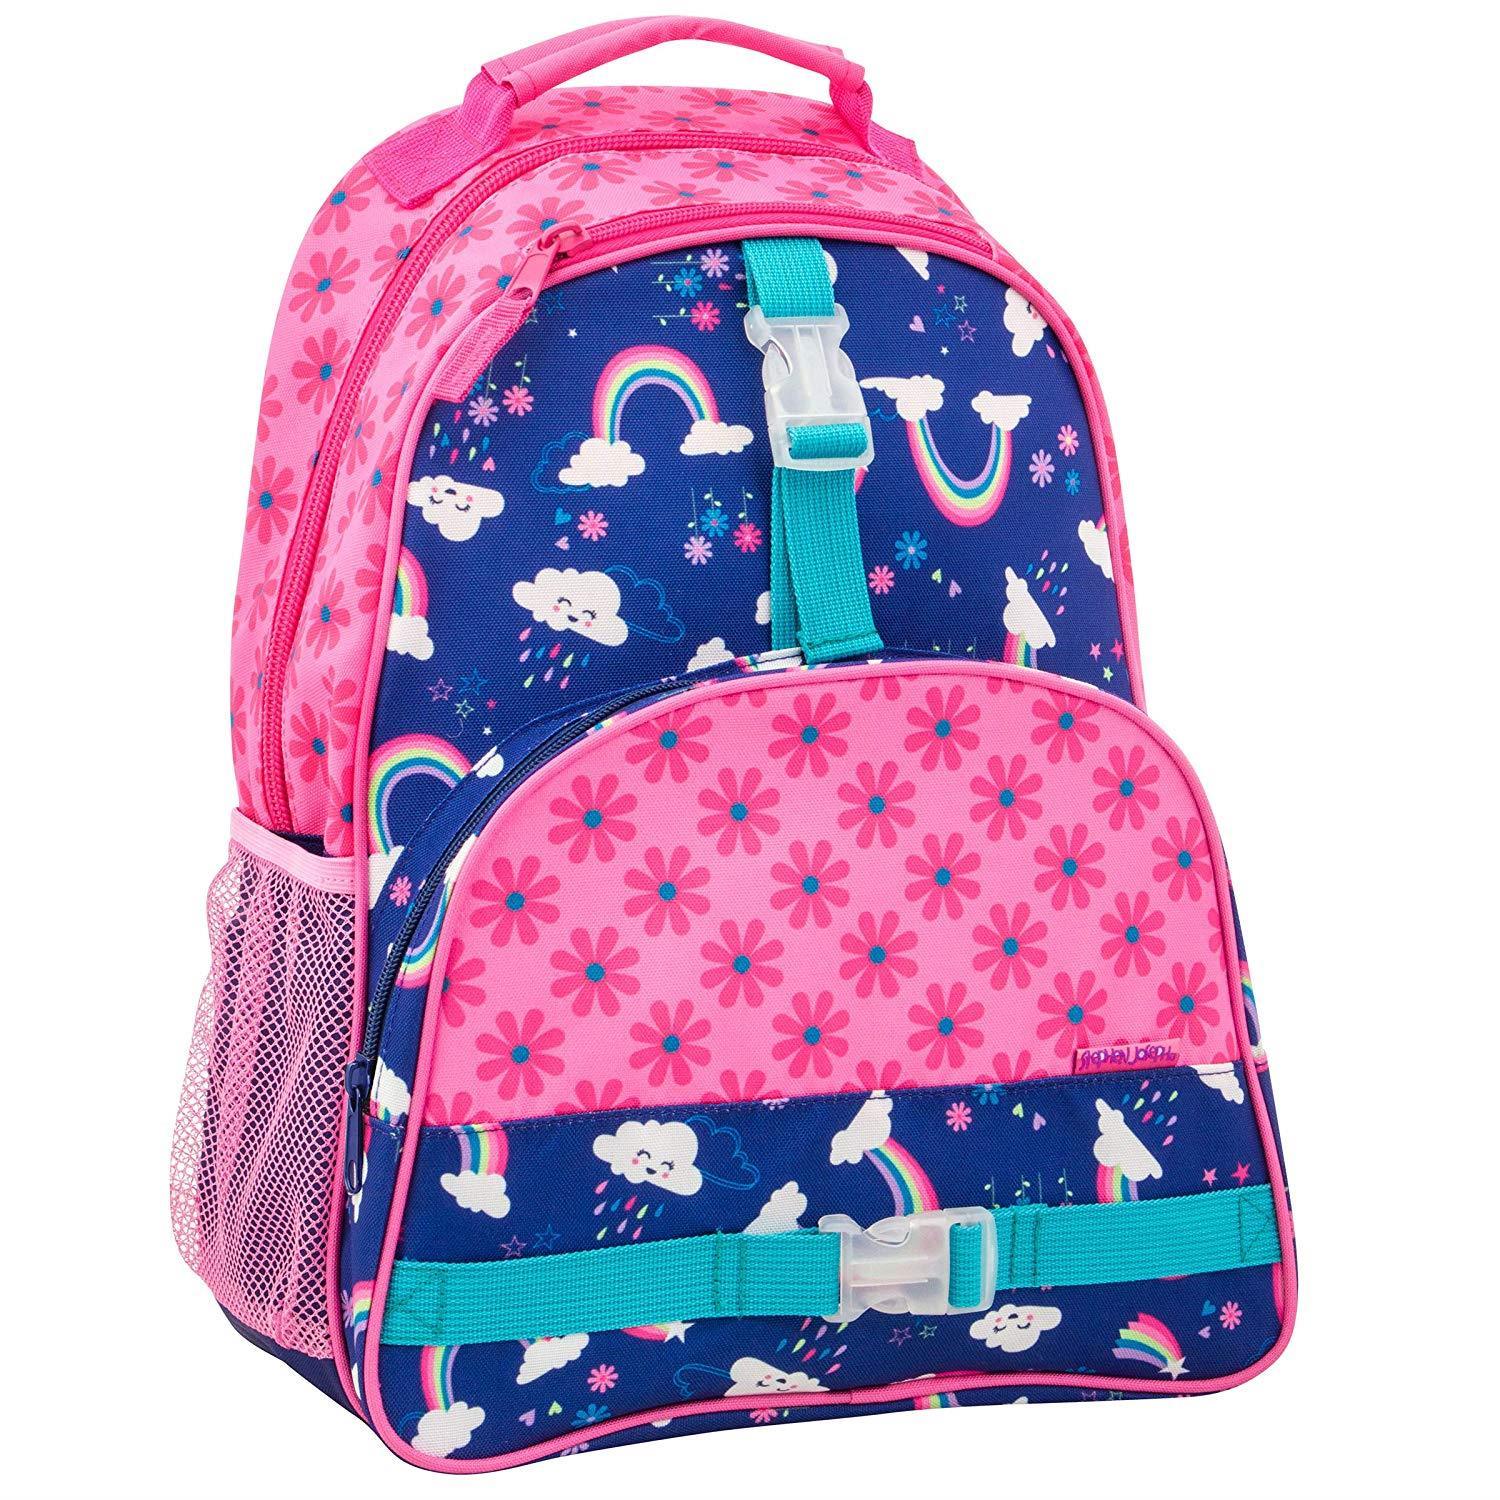 Stephen Joseph All Over Print 16 inch Backpack Rainbow - BumbleToys - 5-7 Years, Backpack, Cecil, Girls, Pre-Order, School Supplies